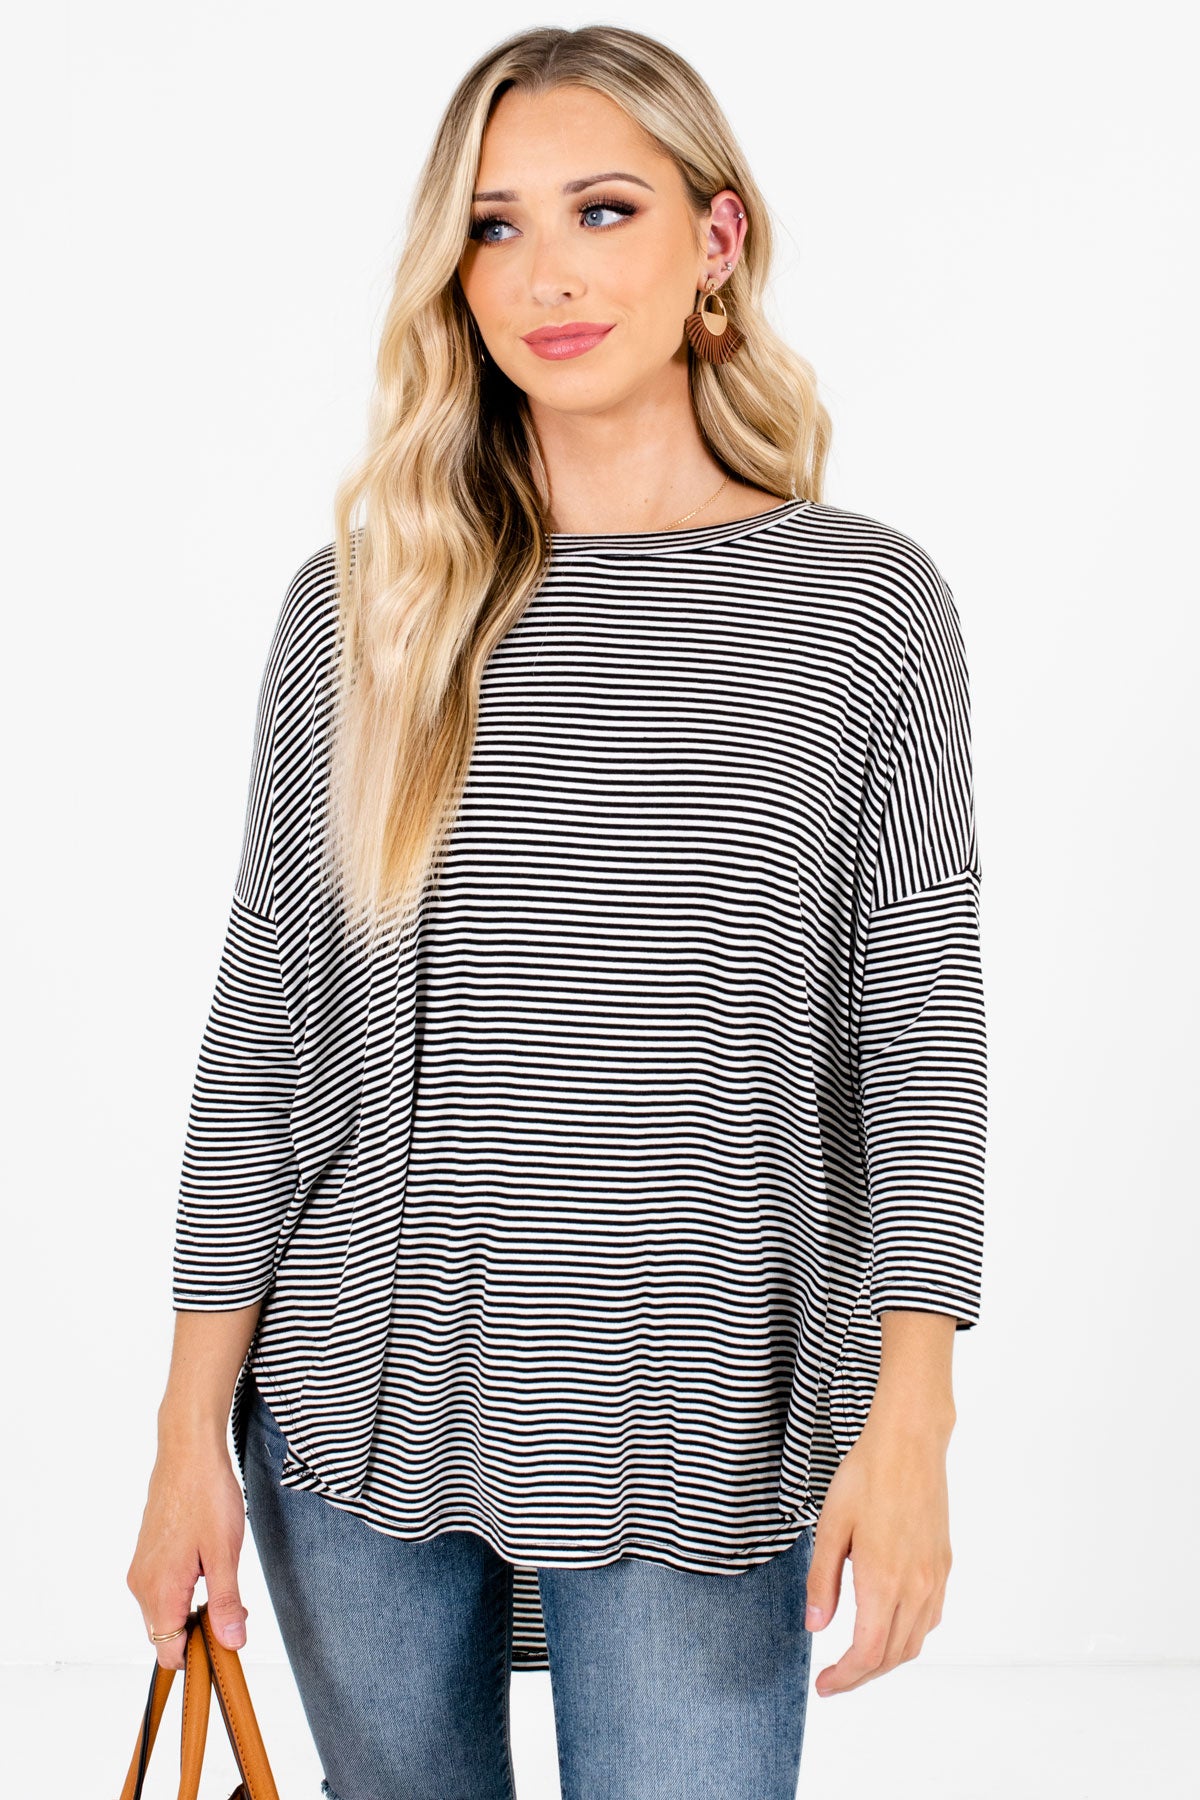 Women's Black and White Layering Boutique Tops 